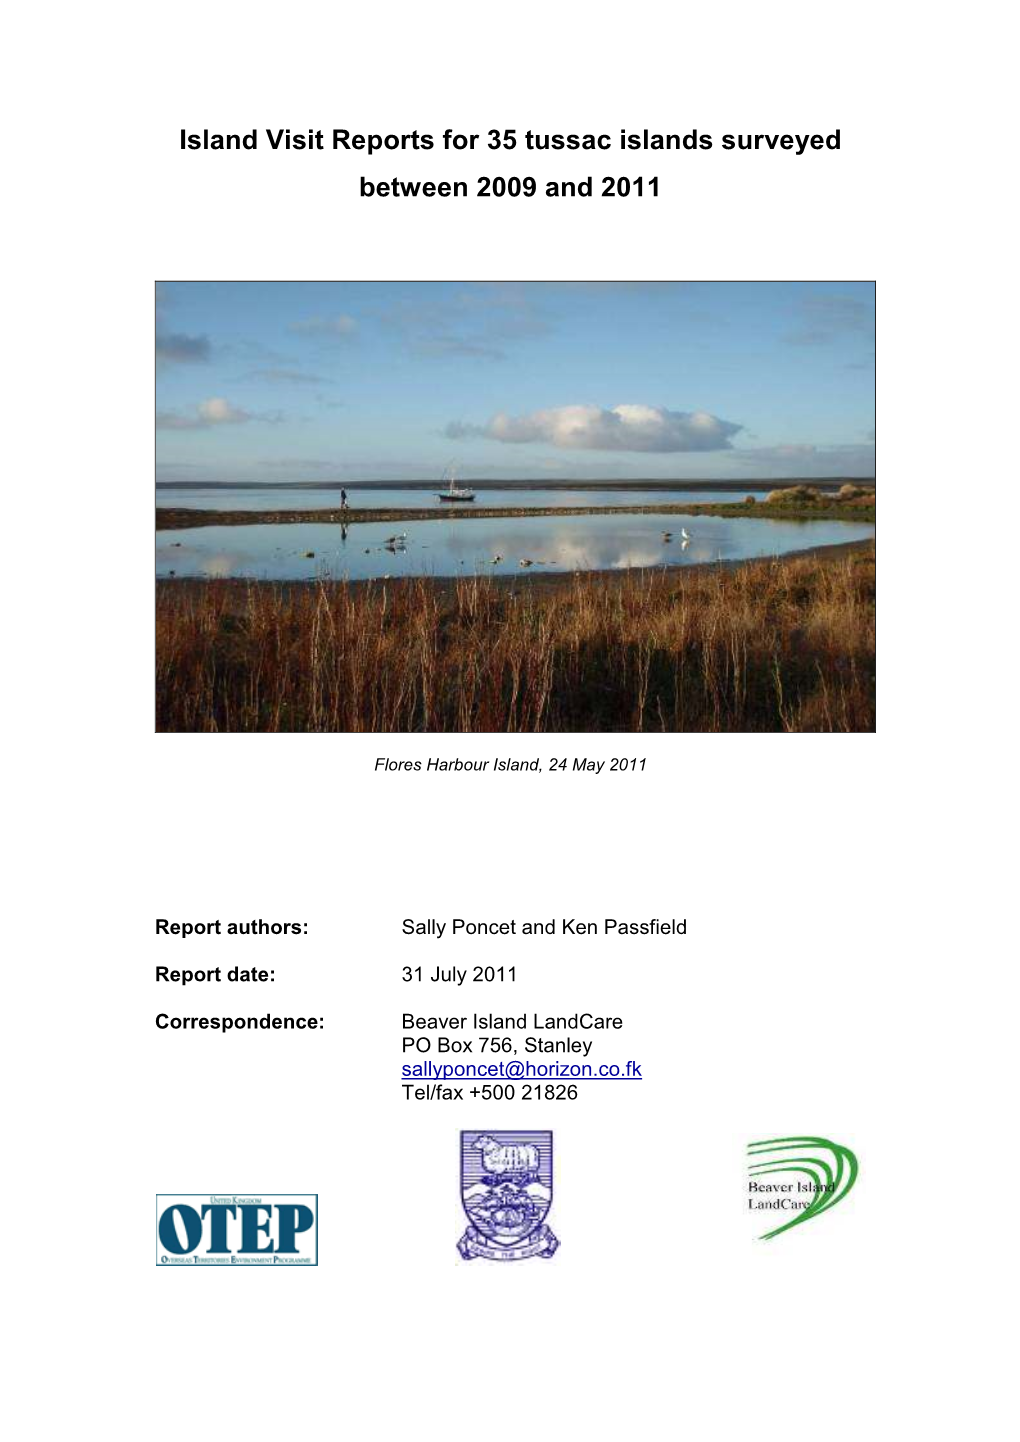 Island Visit Reports for 35 Tussac Islands Surveyed Between 2009 and 2011